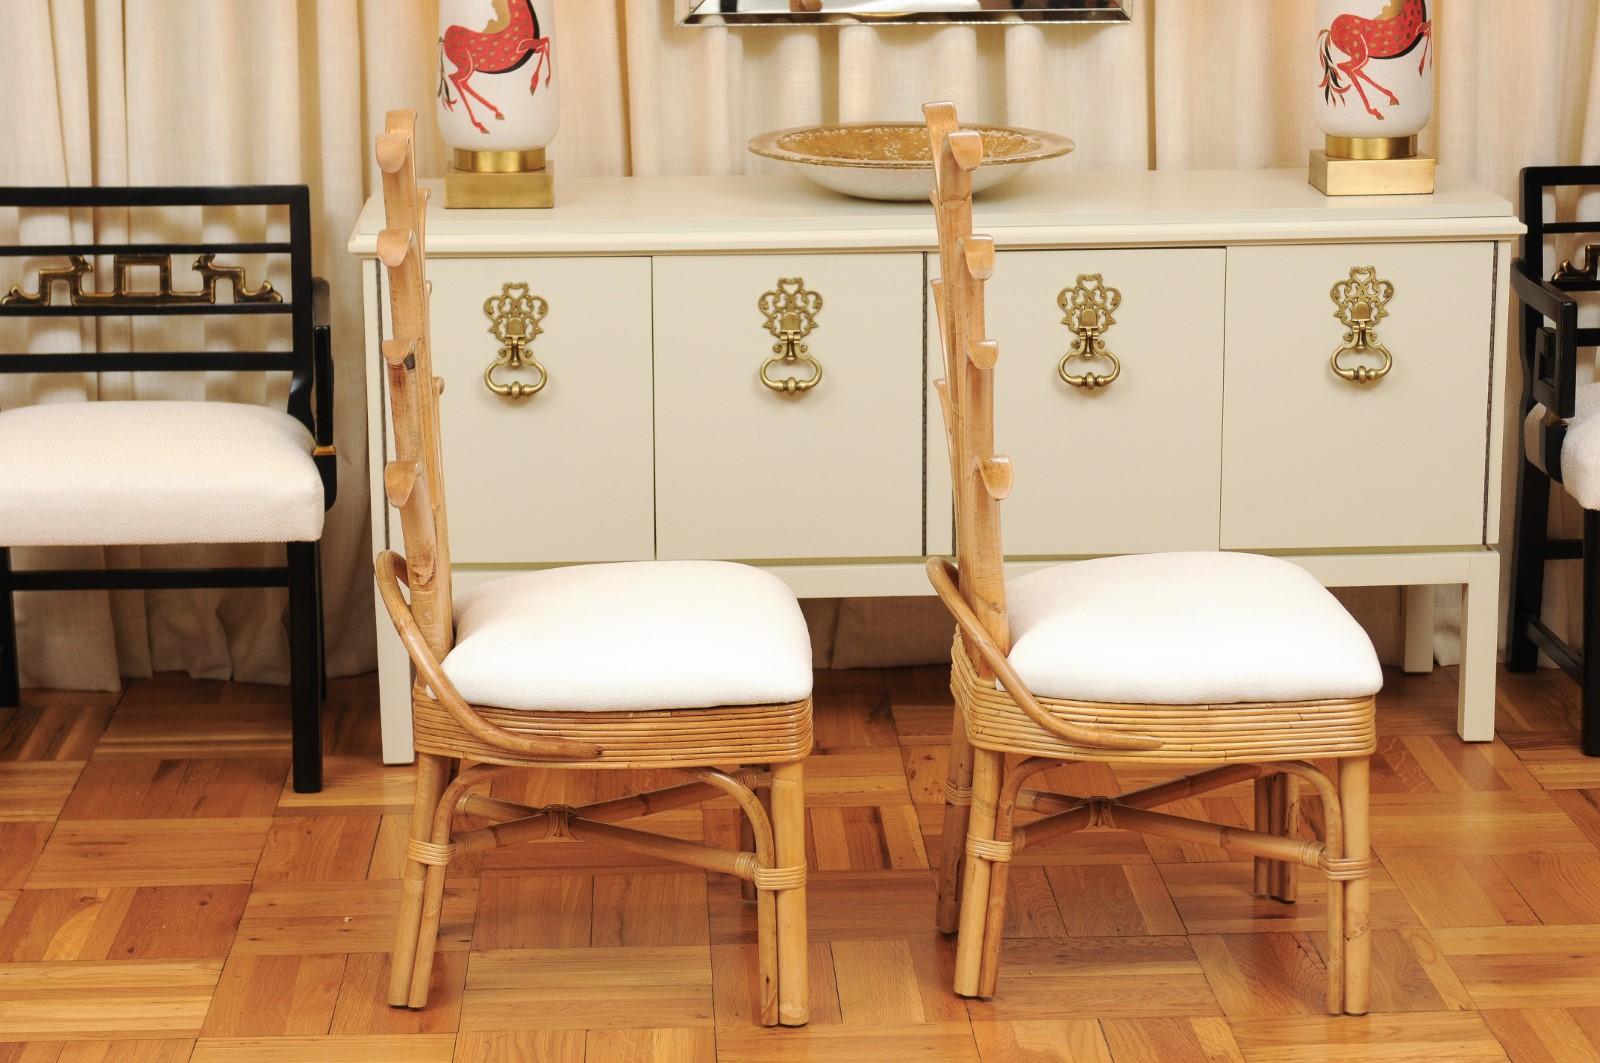 Exquisite Set of 12 Rattan and Cane Palm Frond Dining Chairs, circa 1950 For Sale 2